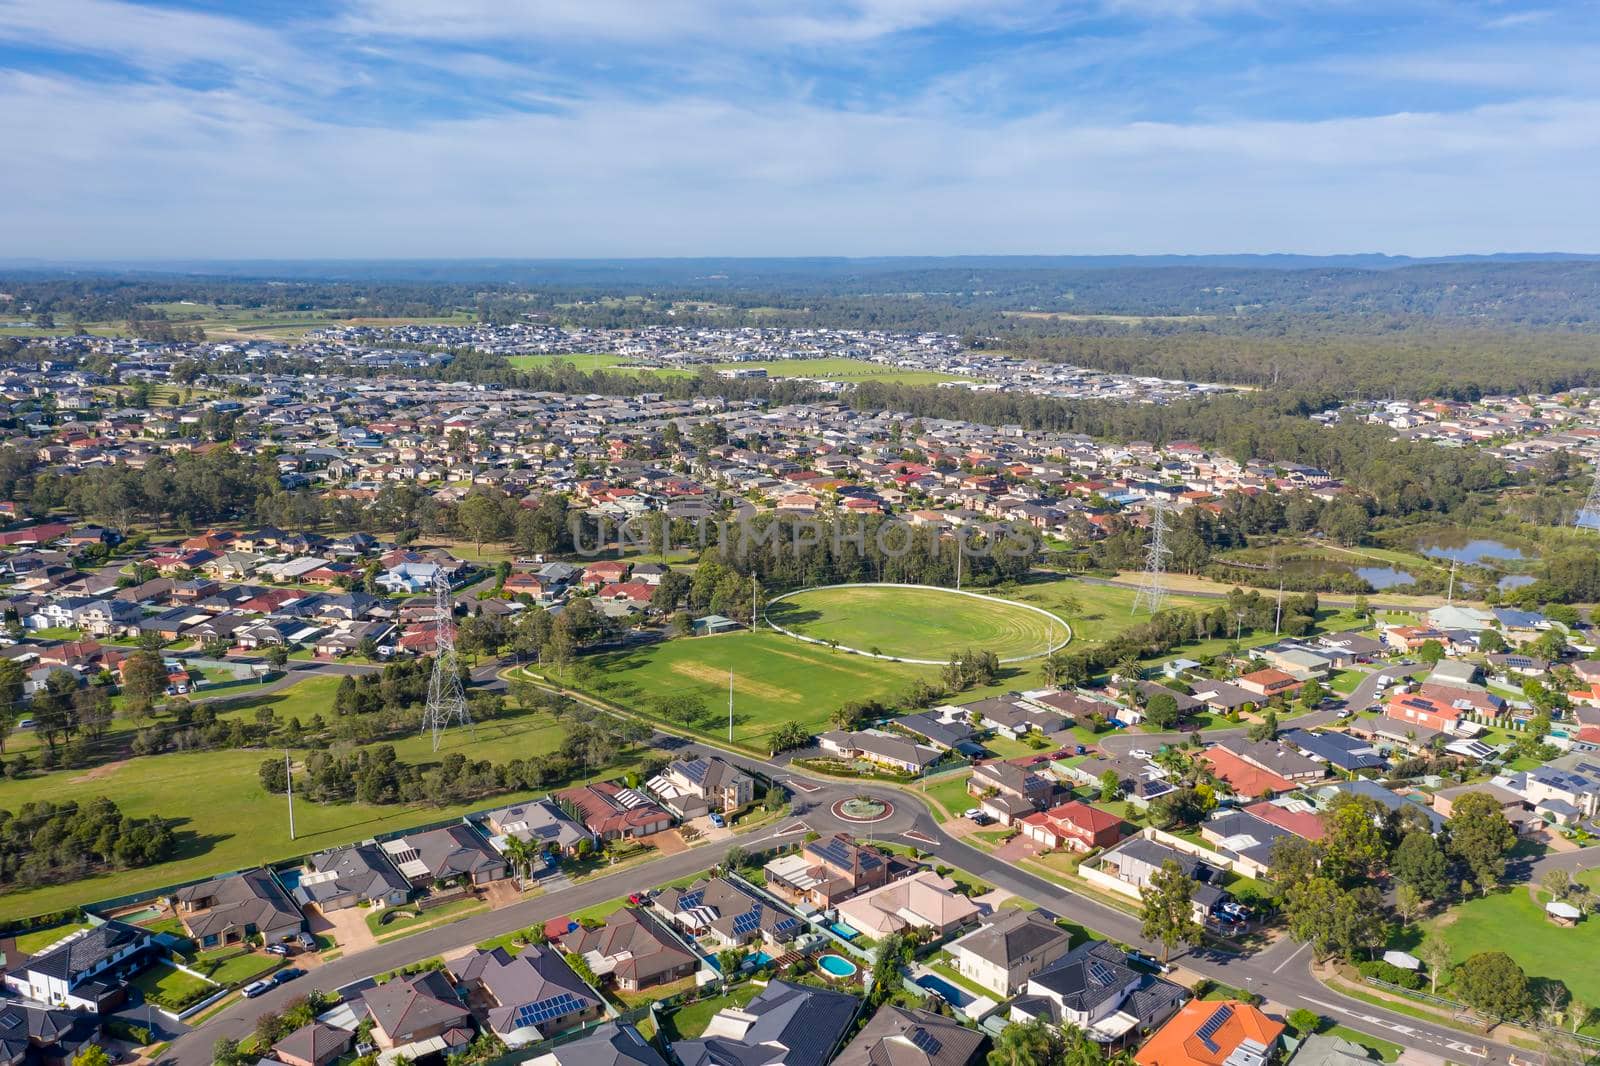 Aerial view of the suburb of Glenmore Park by WittkePhotos